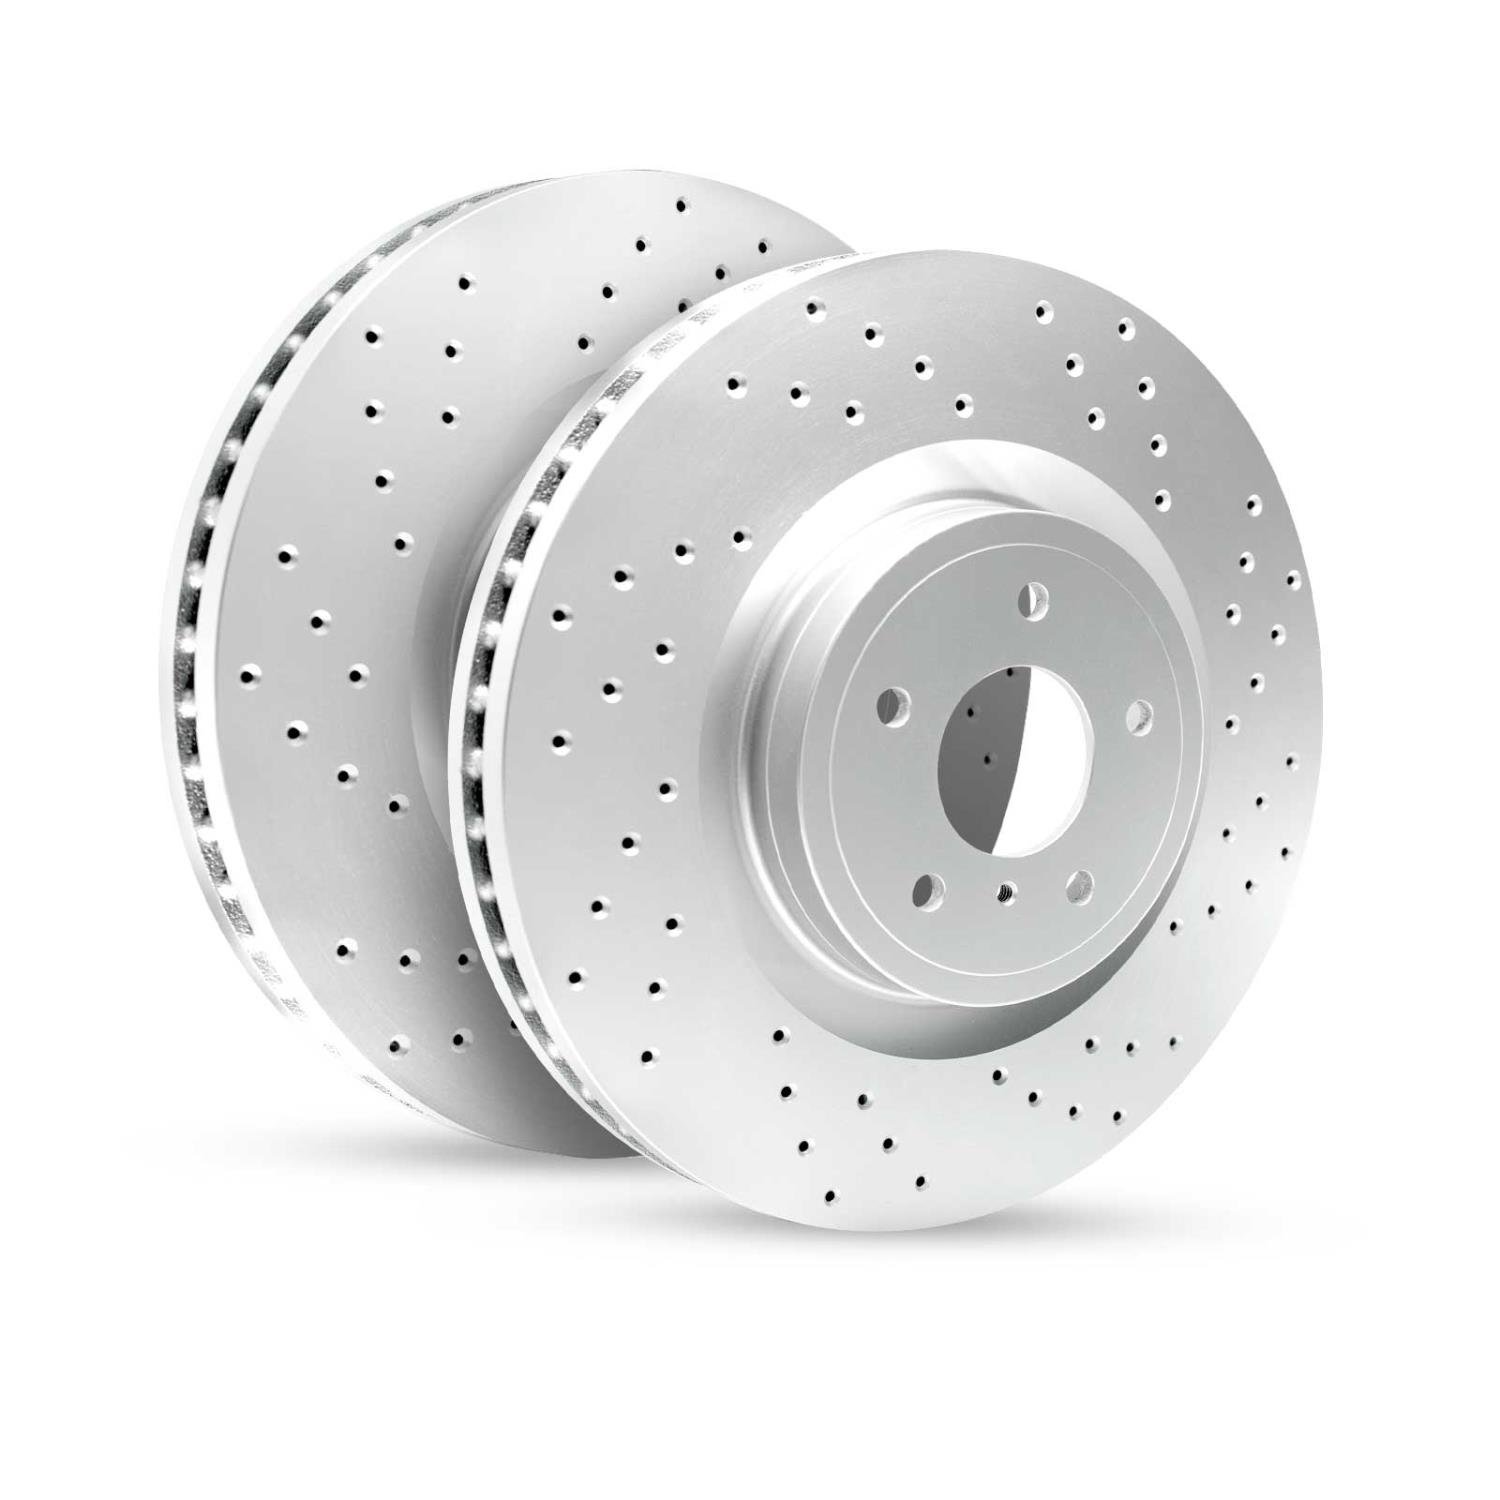 GEO-Carbon Drilled/Slotted Rotors, 1998-2015 Infiniti/Nissan, Position: Front